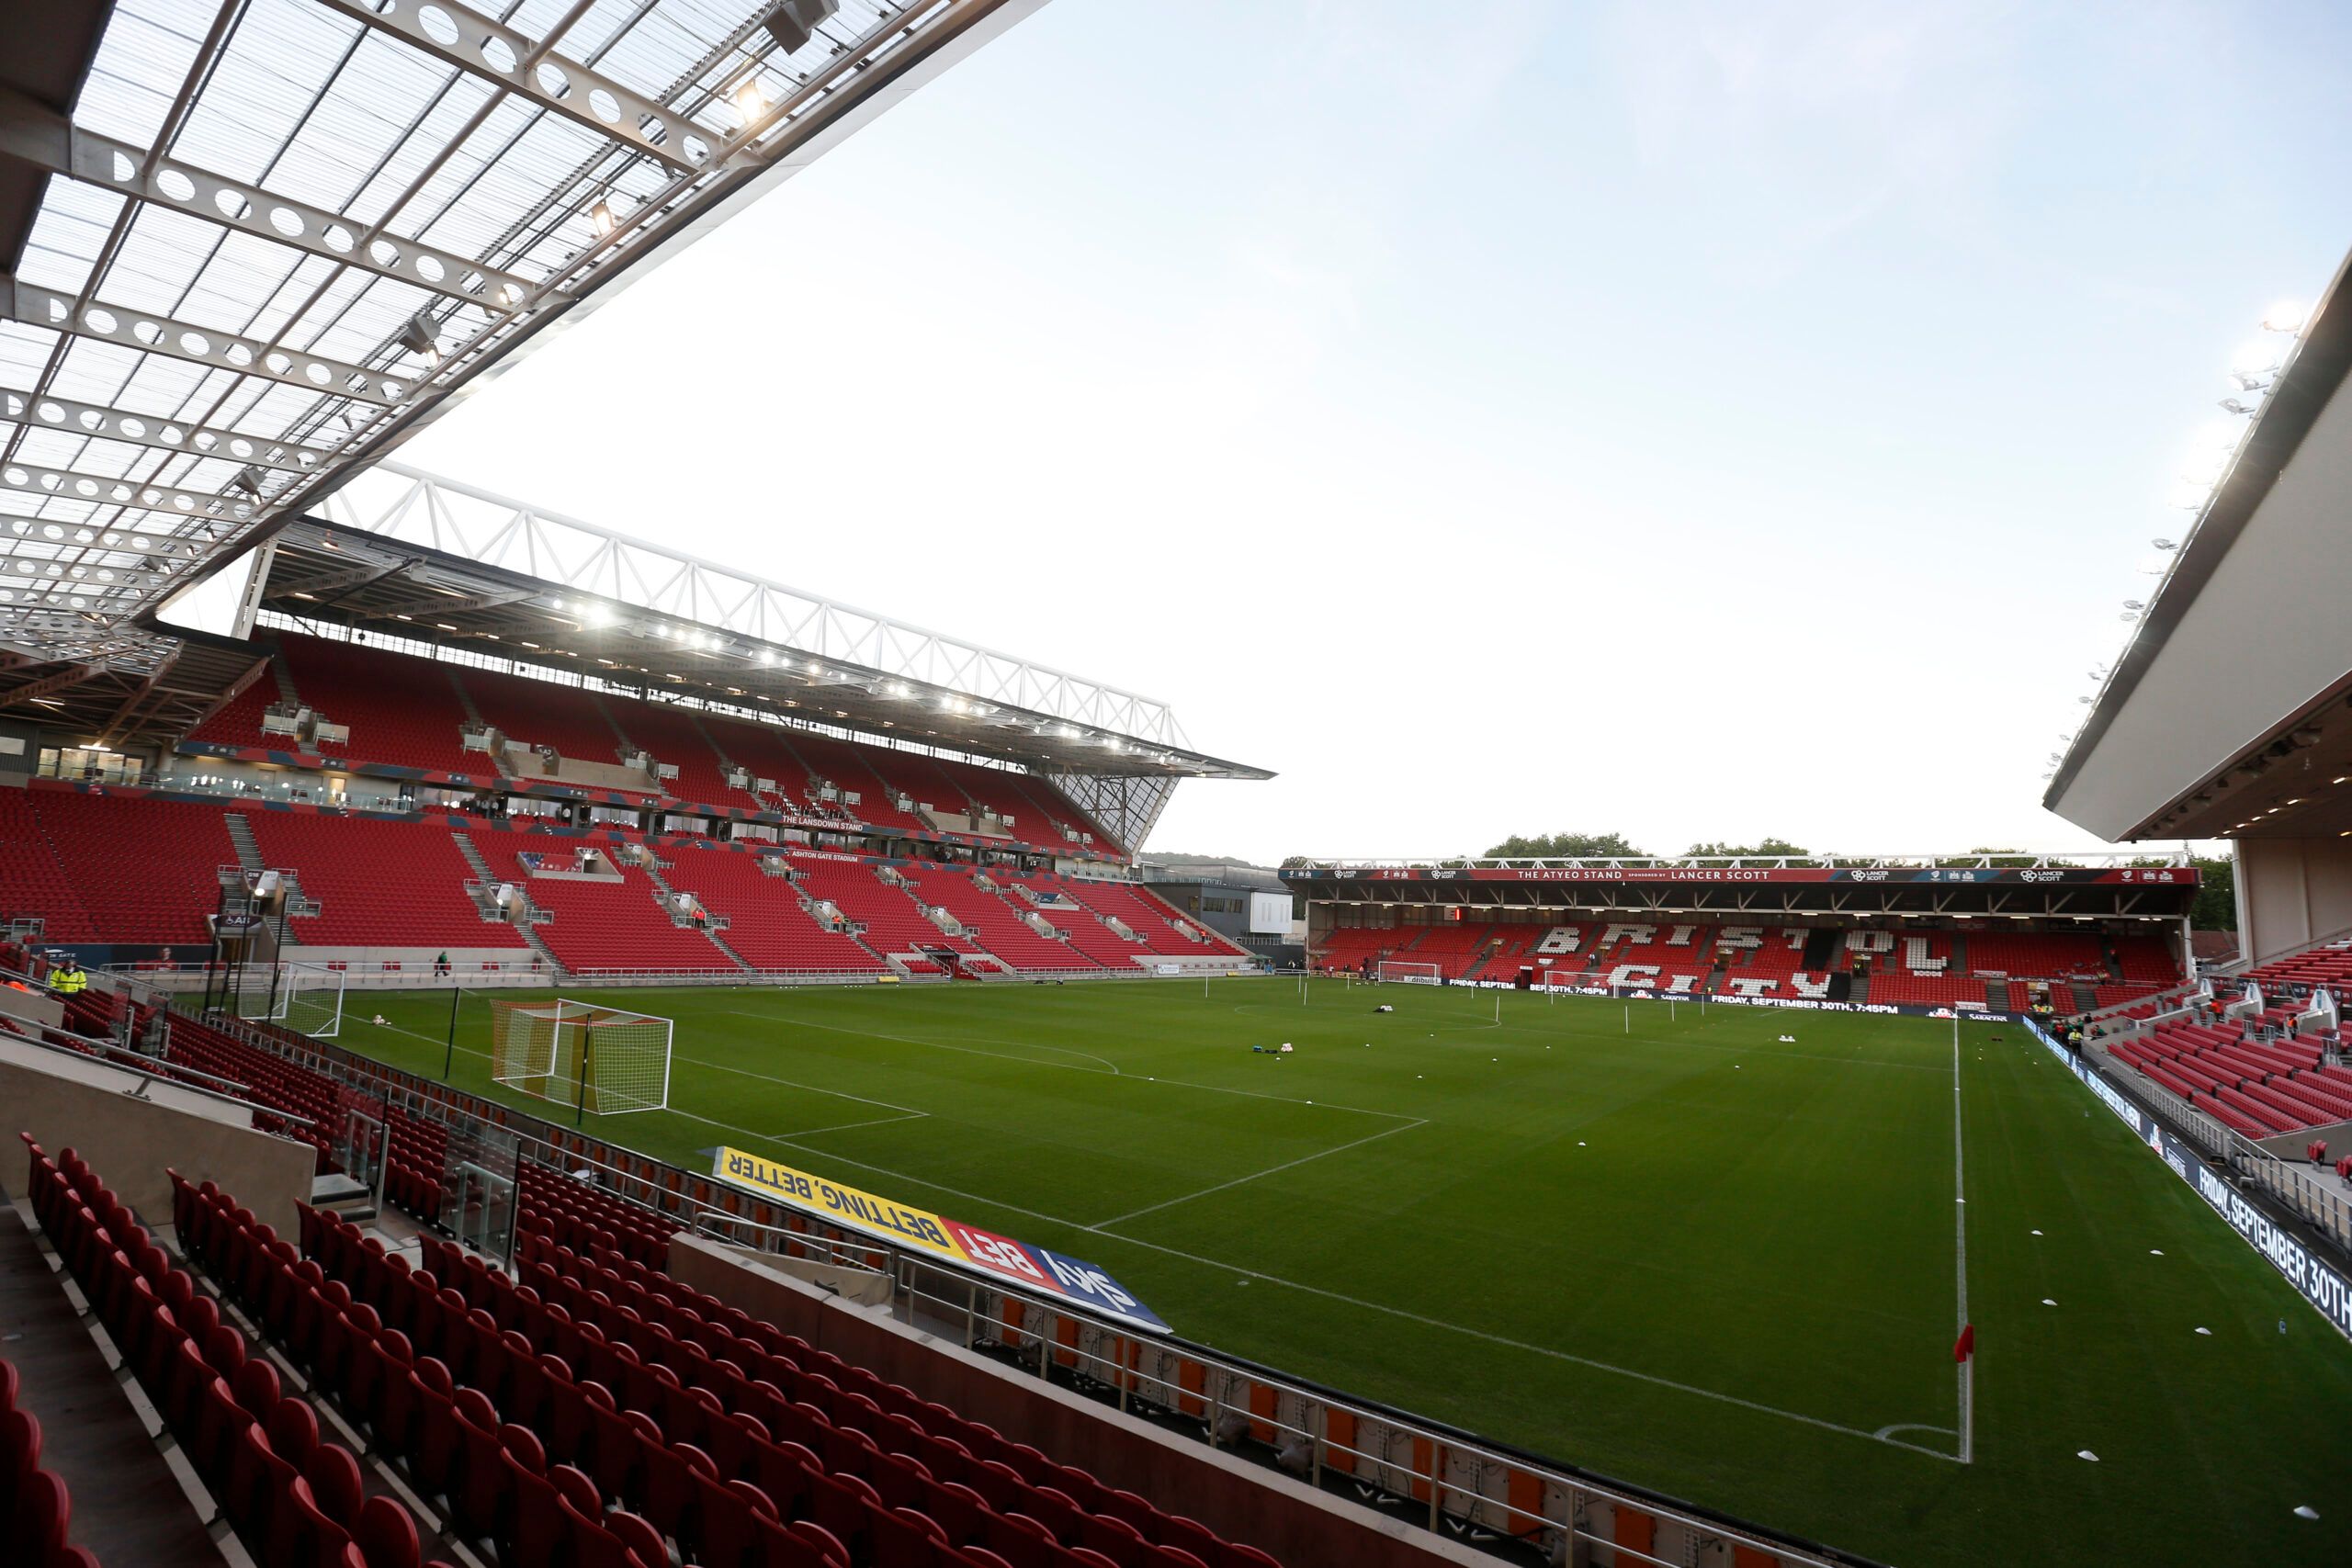 Britain Soccer Football - Bristol City v Leeds United - Sky Bet Championship - Ashton Gate - 27/9/16
General view of Ashton Gate before the match
Mandatory Credit: Action Images / Matthew Childs
Livepic
EDITORIAL USE ONLY. No use with unauthorized audio, video, data, fixture lists, club/league logos or 